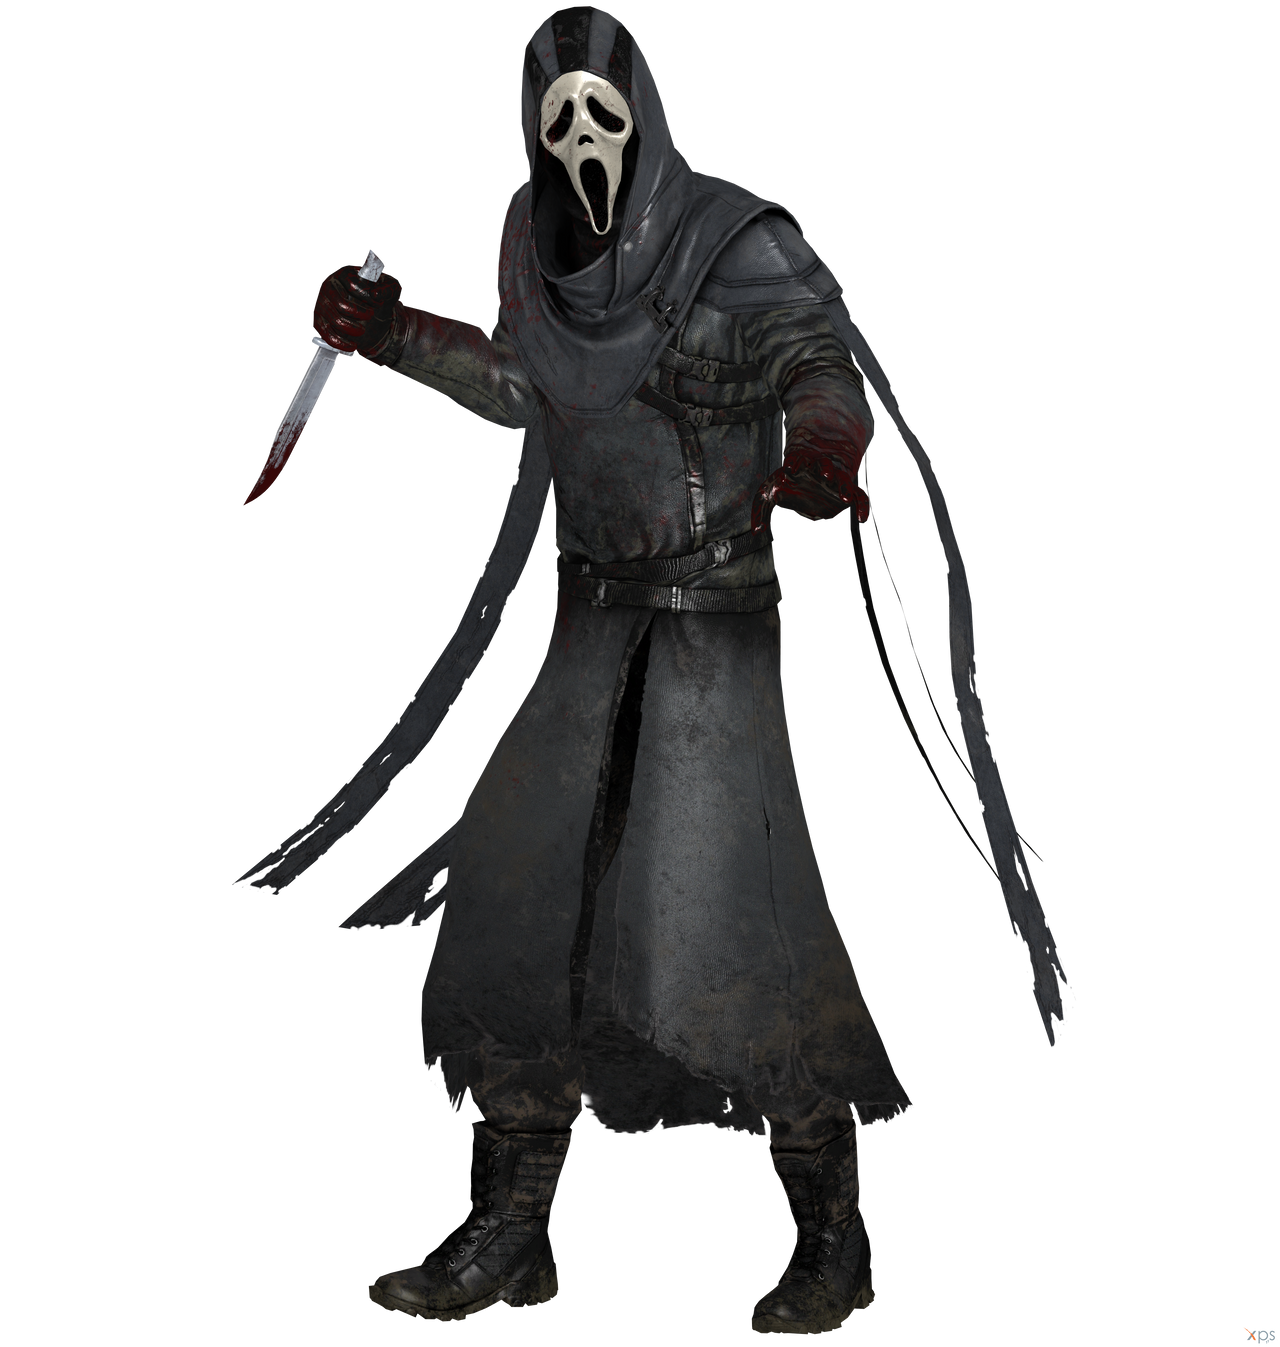 dead_by_daylight__danny_johnson__the_ghost_face__by_ogloc069_ddh5ufd-fullview.png